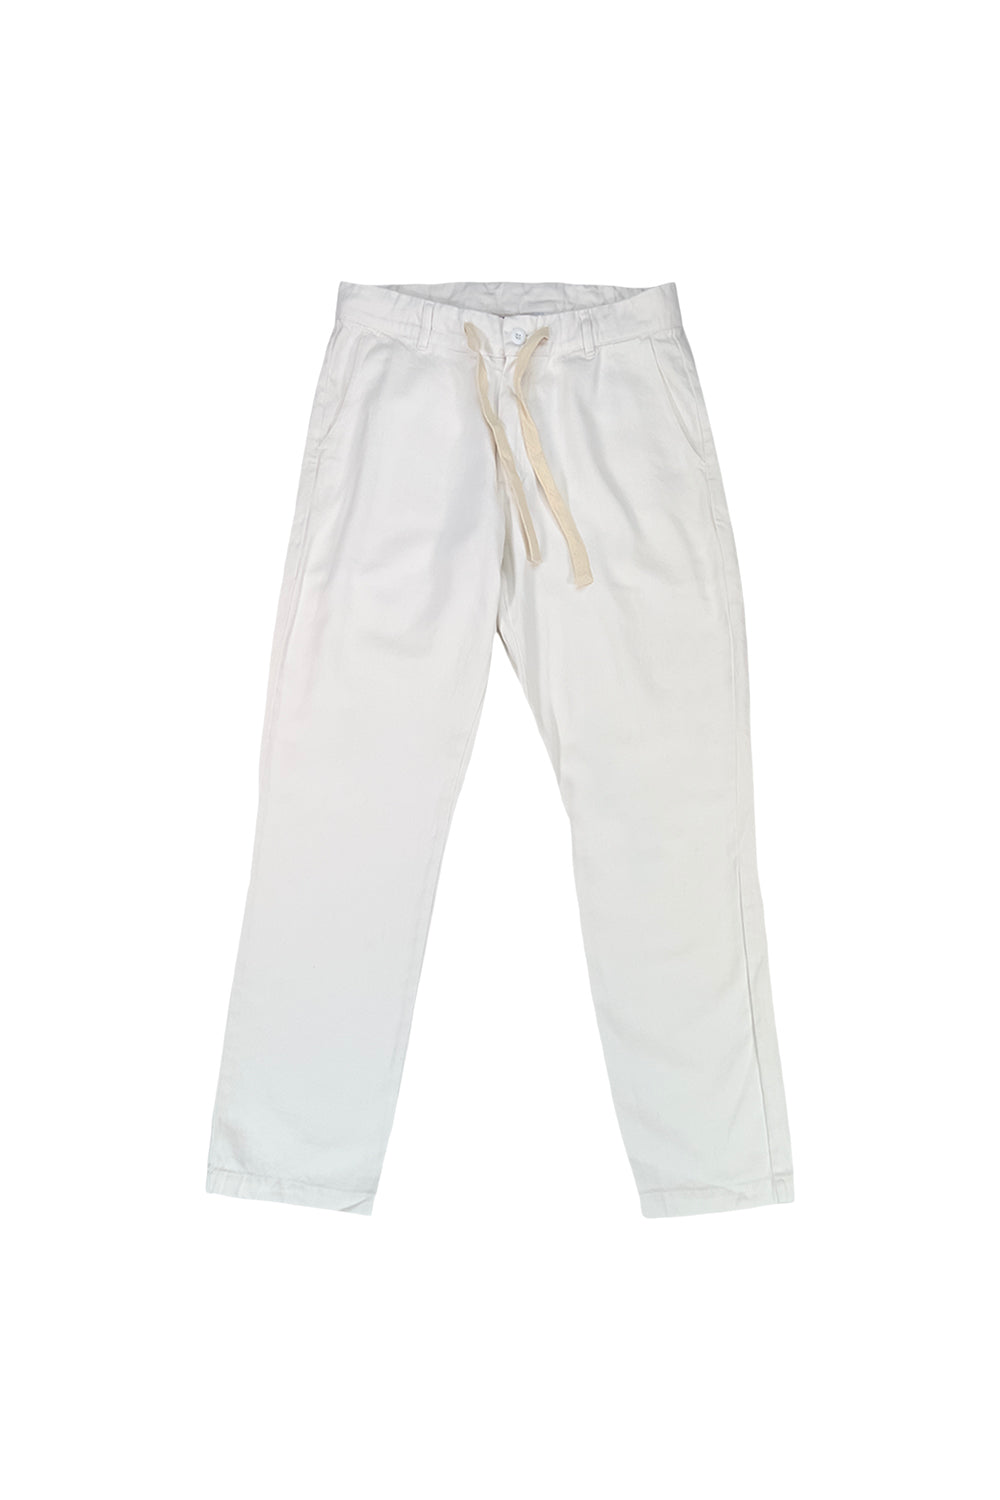 Pacific Coast Pant | Jungmaven Hemp Clothing & Accessories / Color: Washed White